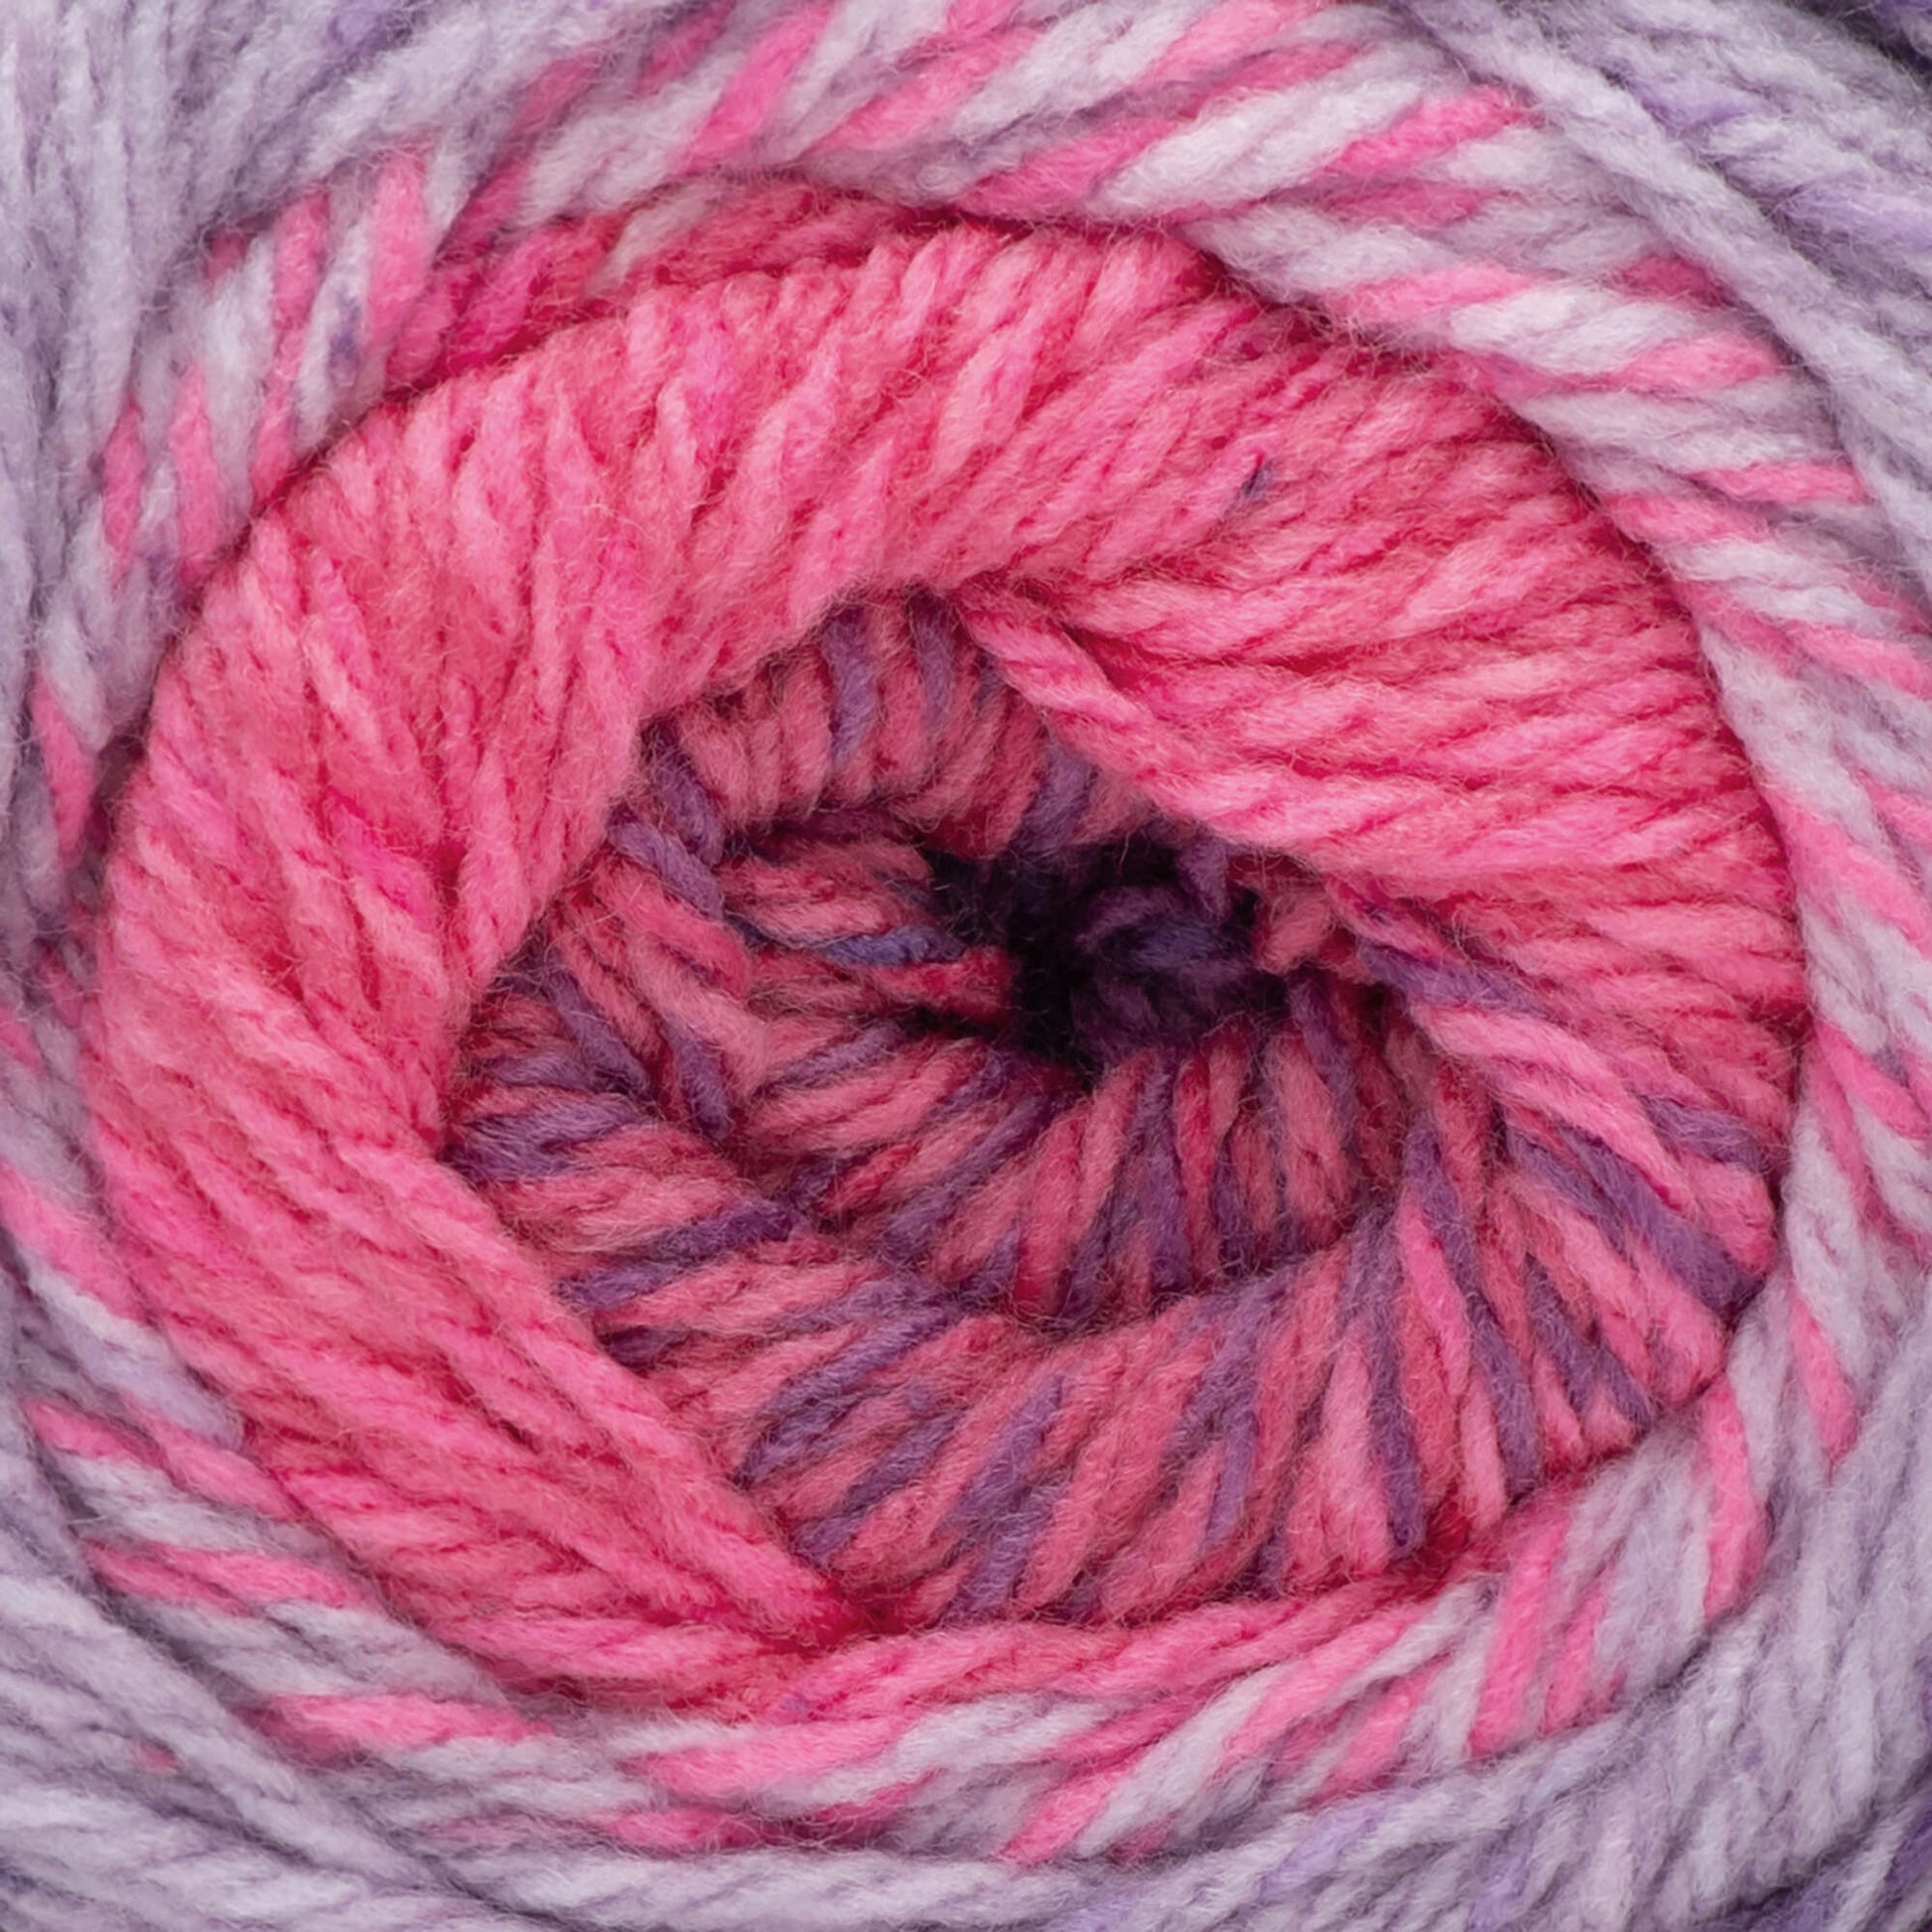 Red Heart Roll With It Tweed Yarn - Clearance shades Berry Blush